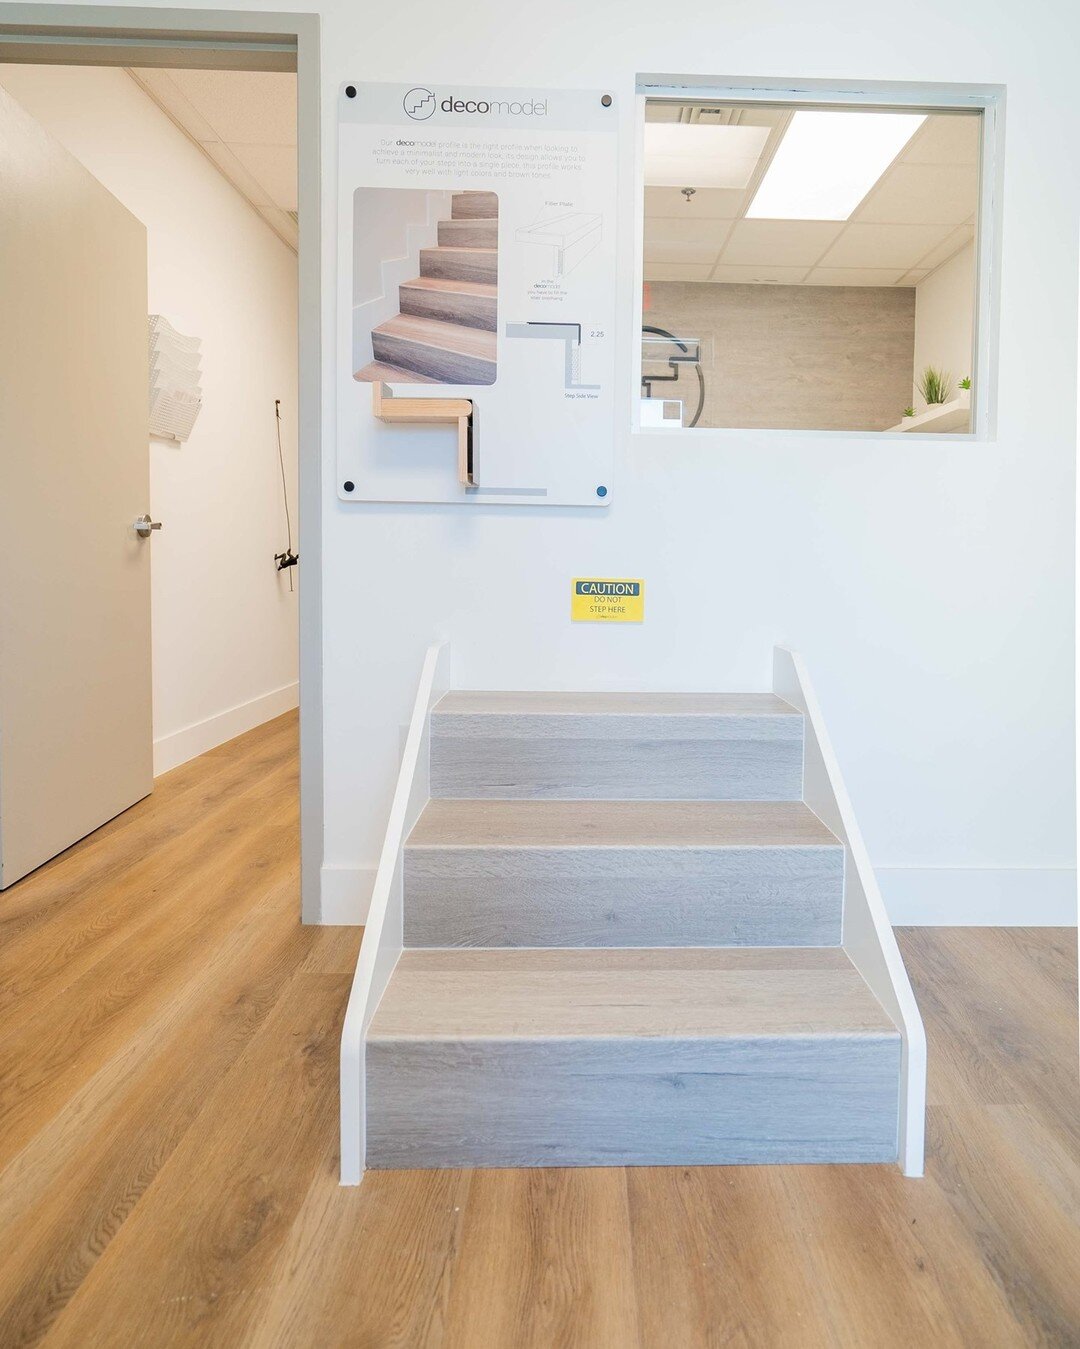 Less is more! this is our deco model. Provides a beautiful finish perfect for a modern home.

Link in bio to request a quote.

#modernhome #interiordesign #staircase #homereno #homerenovation #luxuryhomes #remodel #stairs #steps #stepsolution #stairm